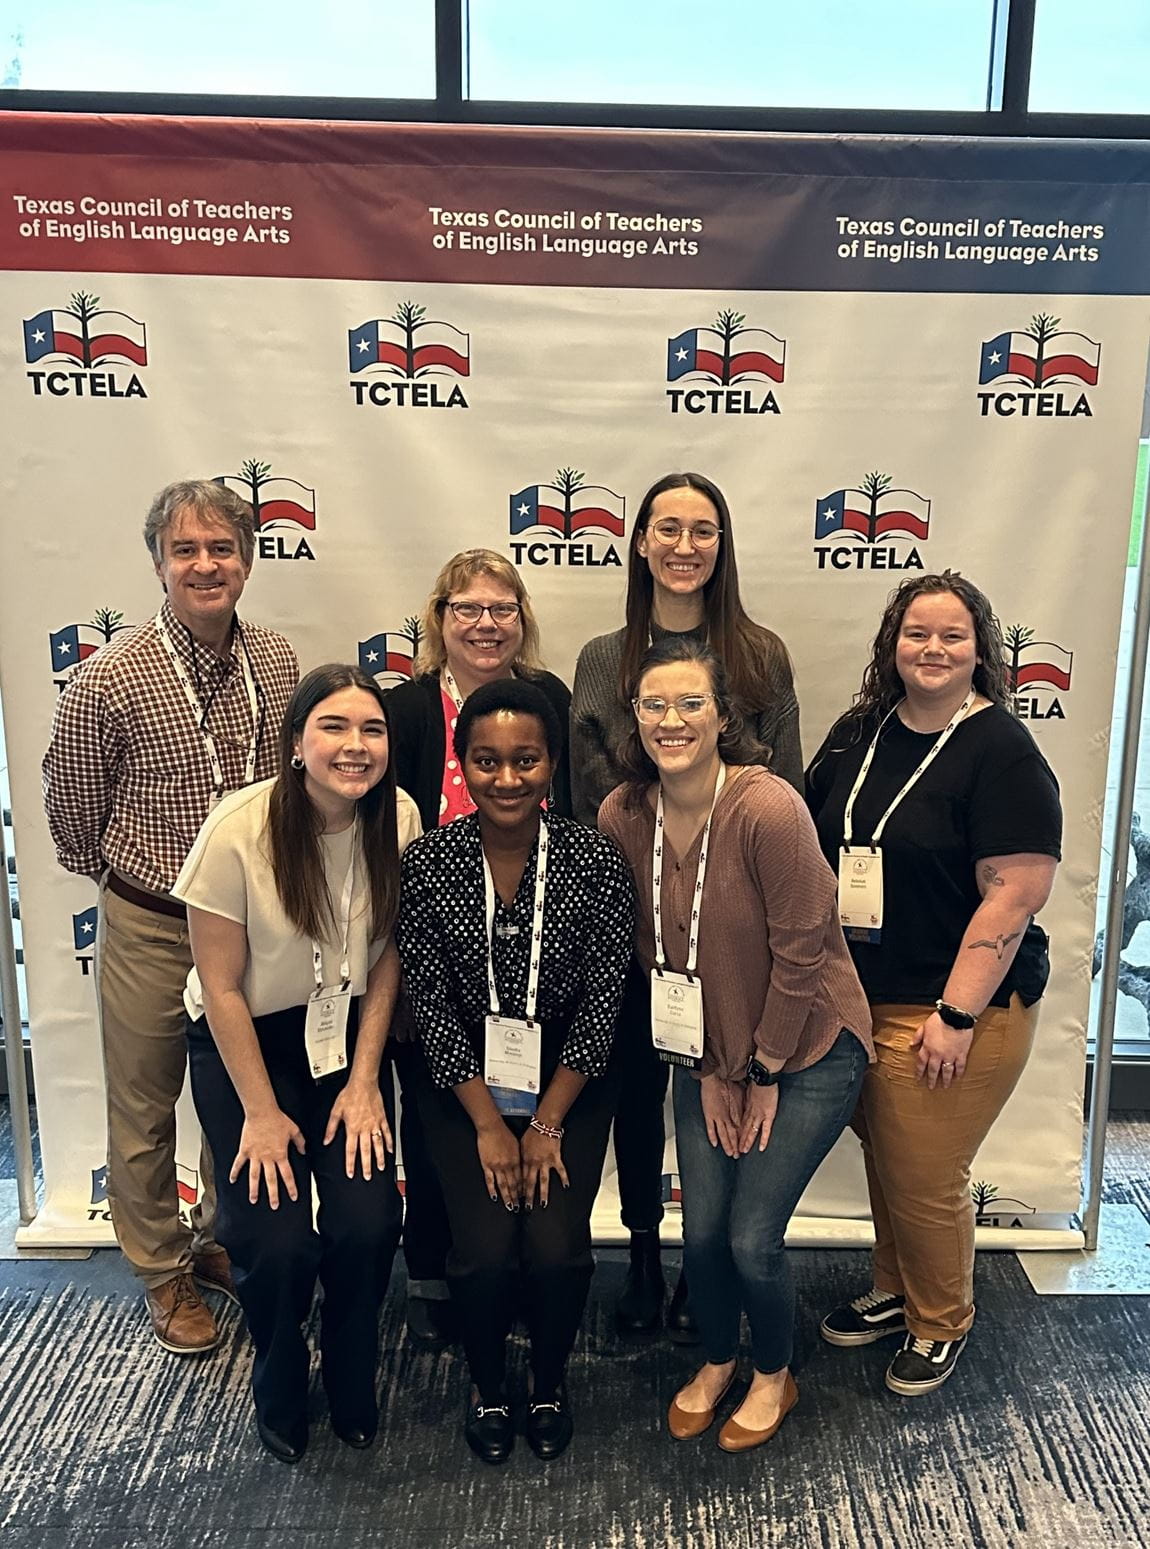 Students present at TCTELA conference in Round Rock, Texas